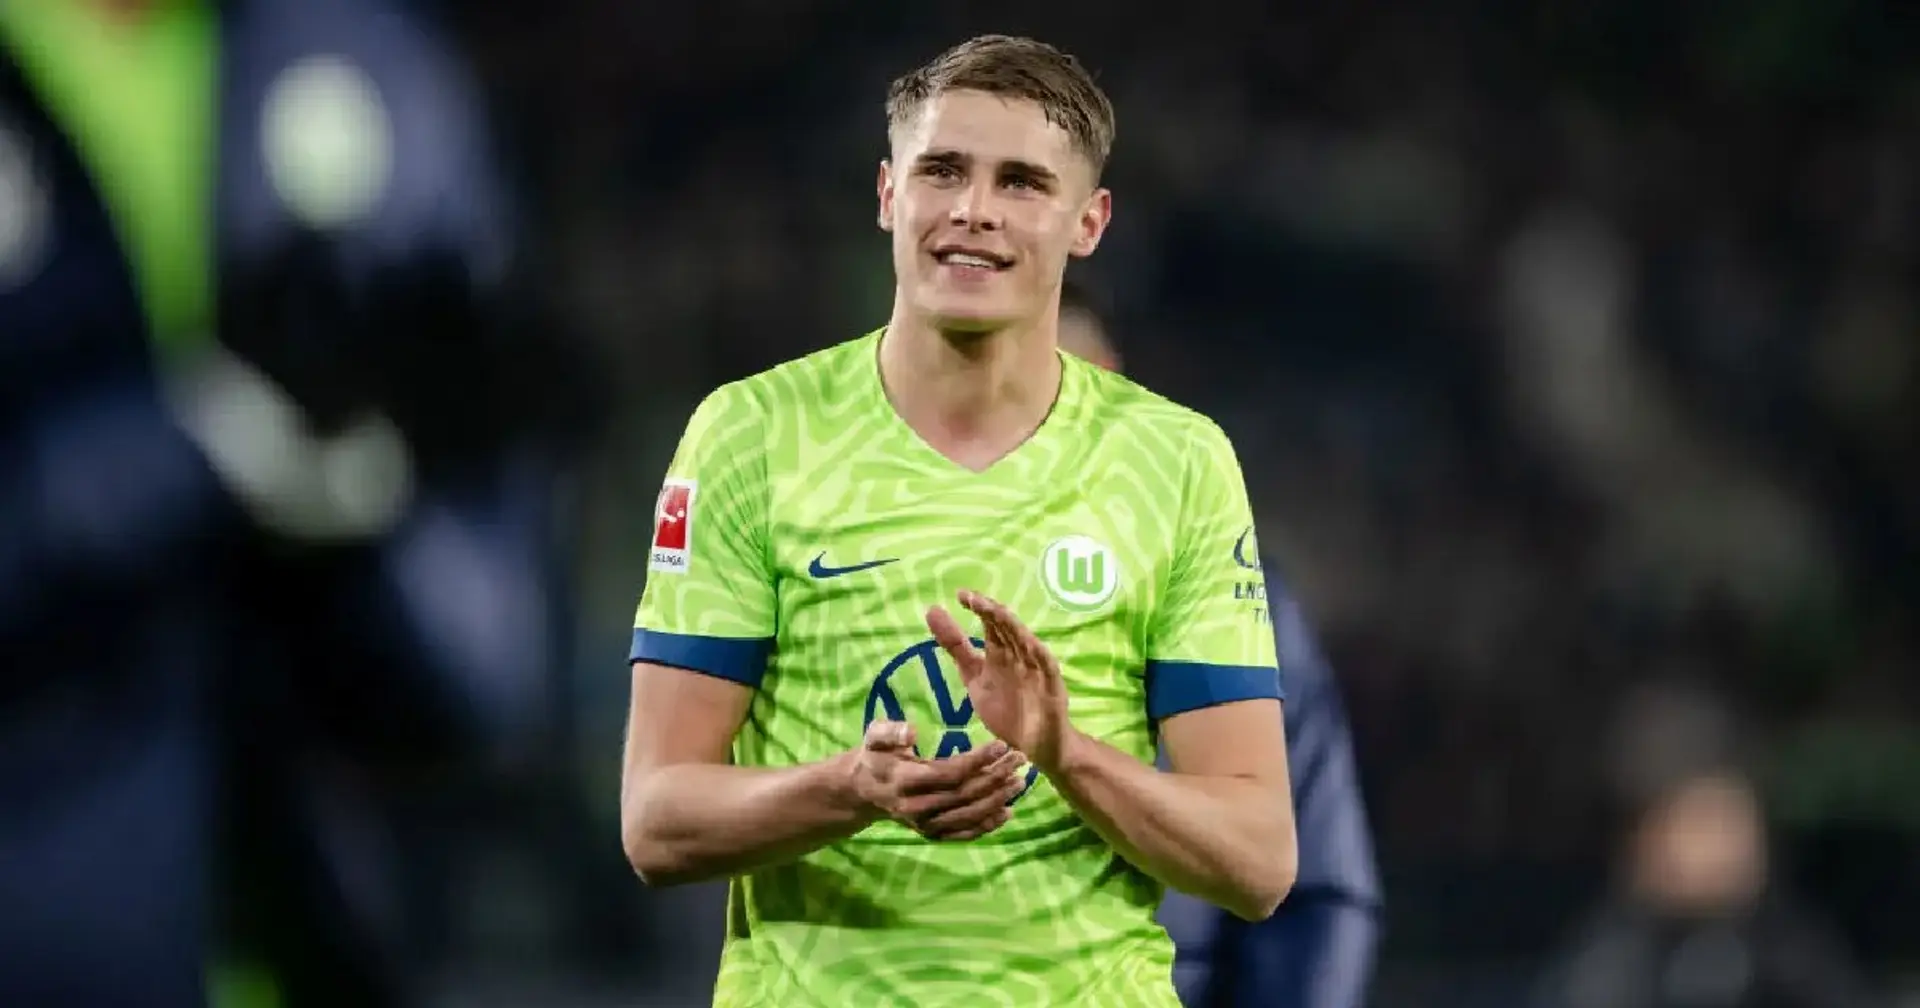 'I think Liverpool is a nice club': Wolfsburg defender hints at potential move this summer